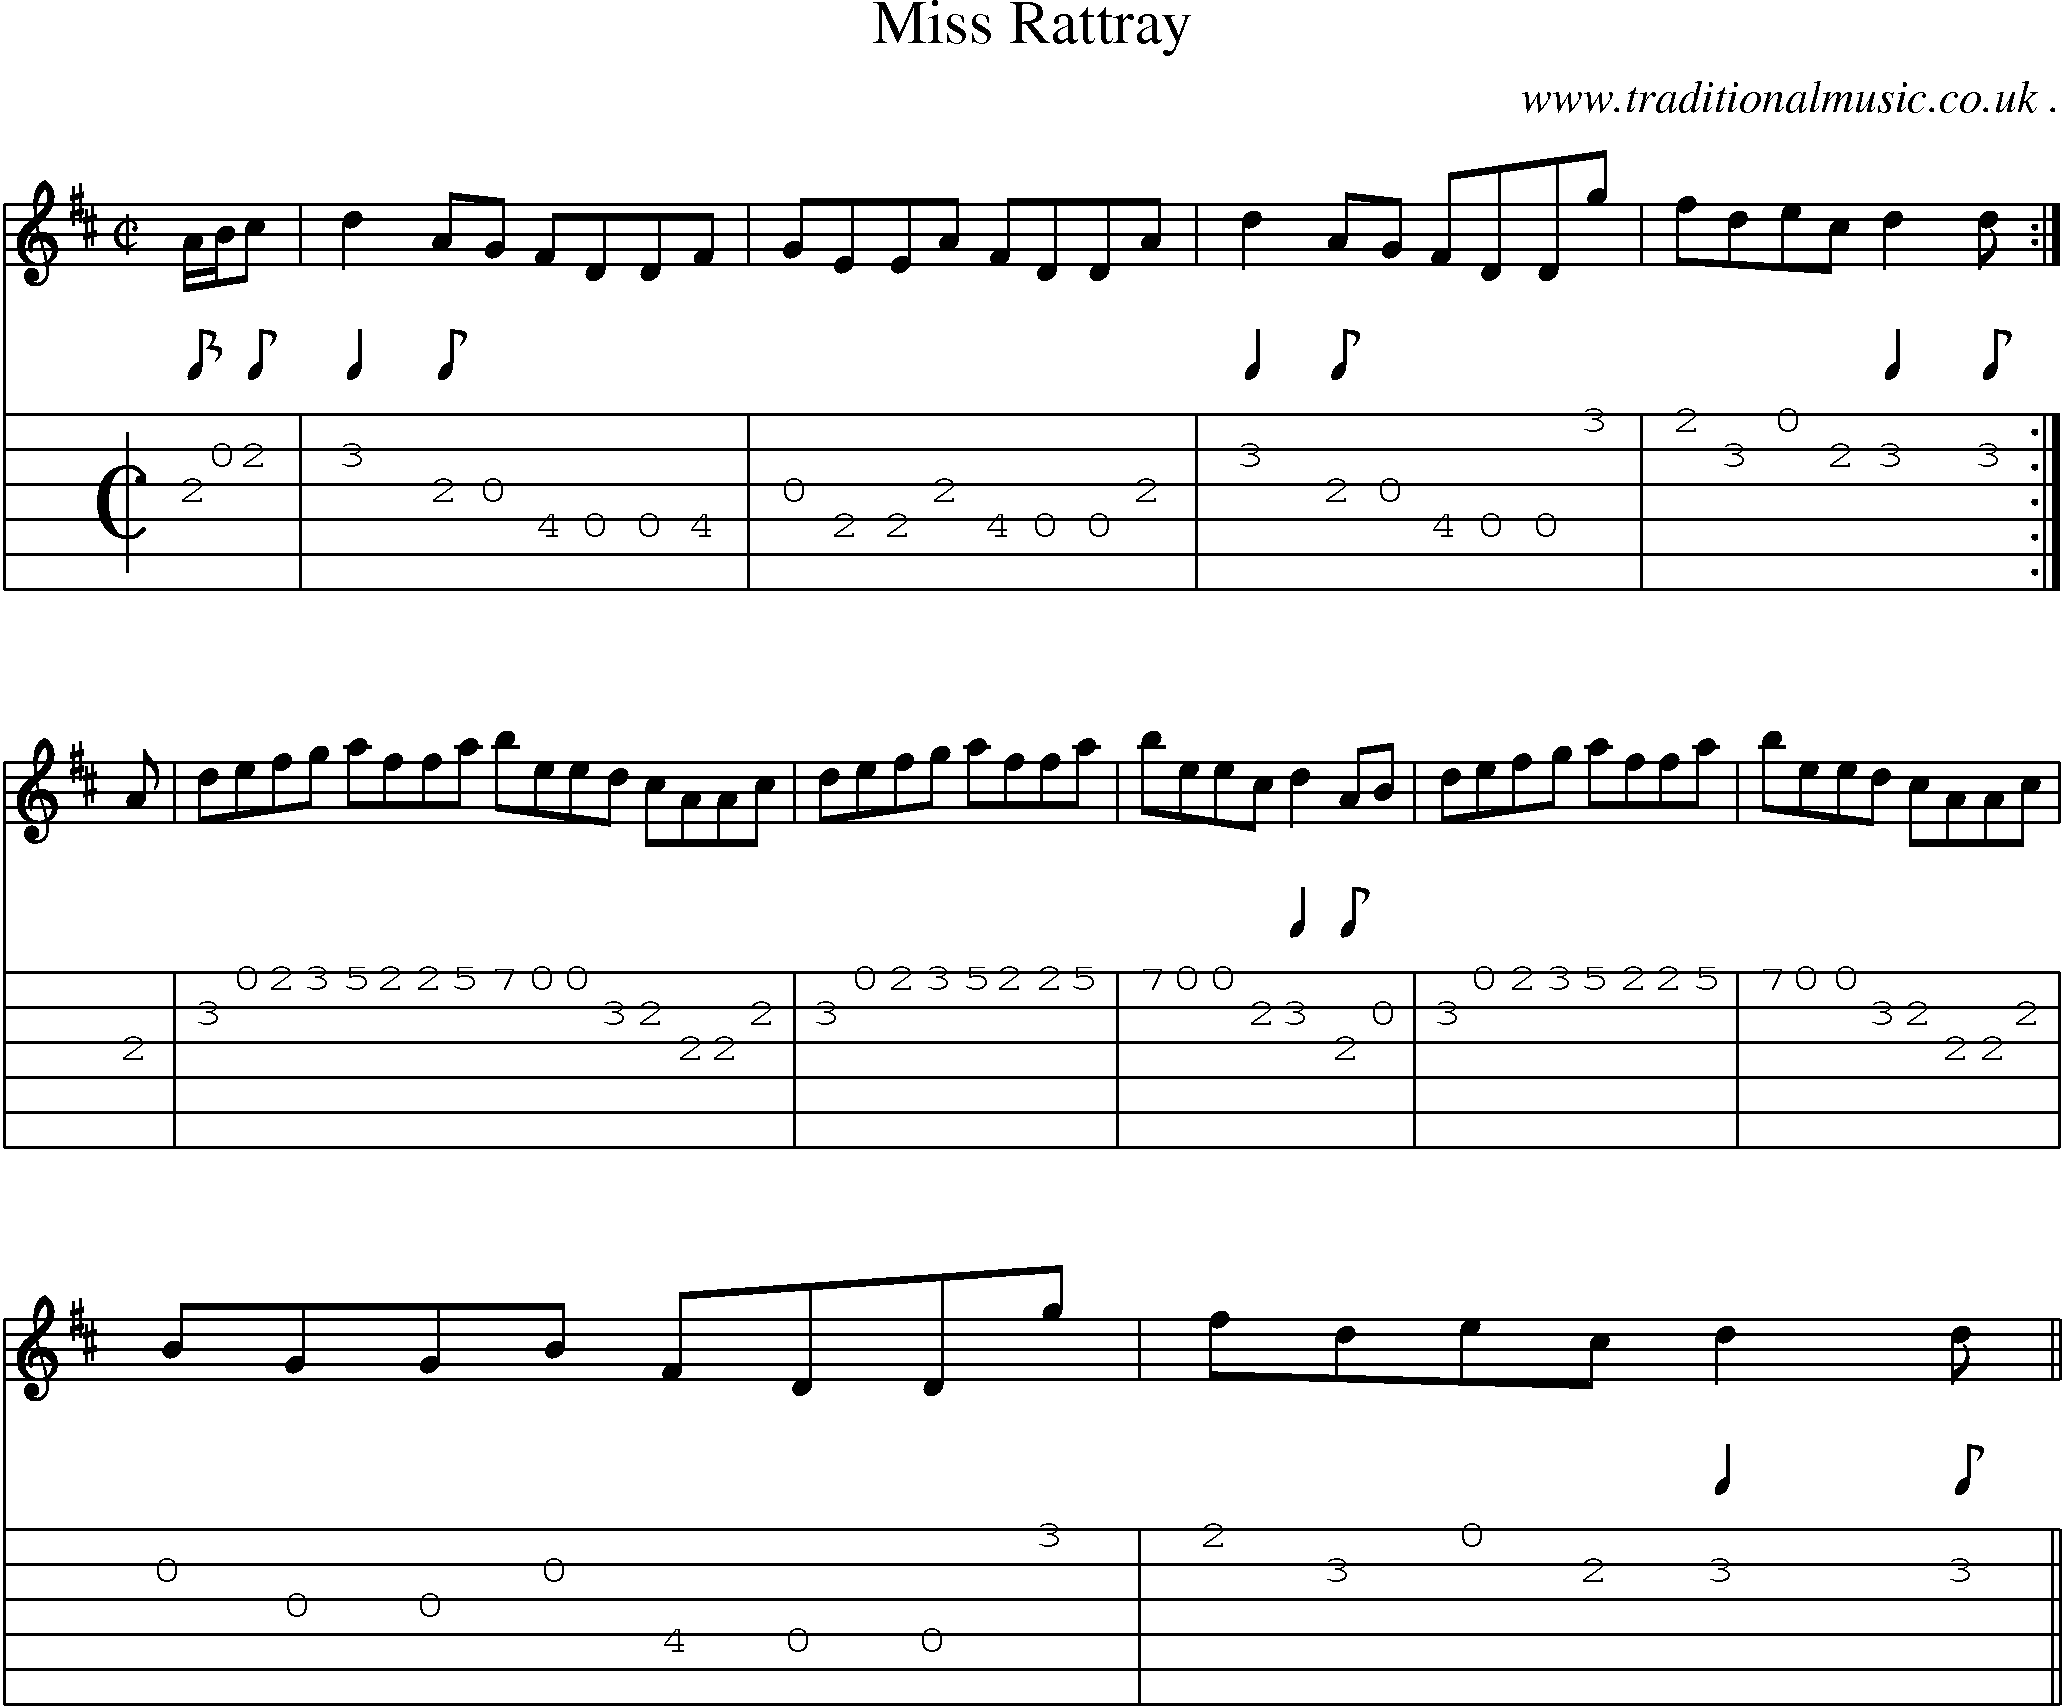 Sheet-music  score, Chords and Guitar Tabs for Miss Rattray